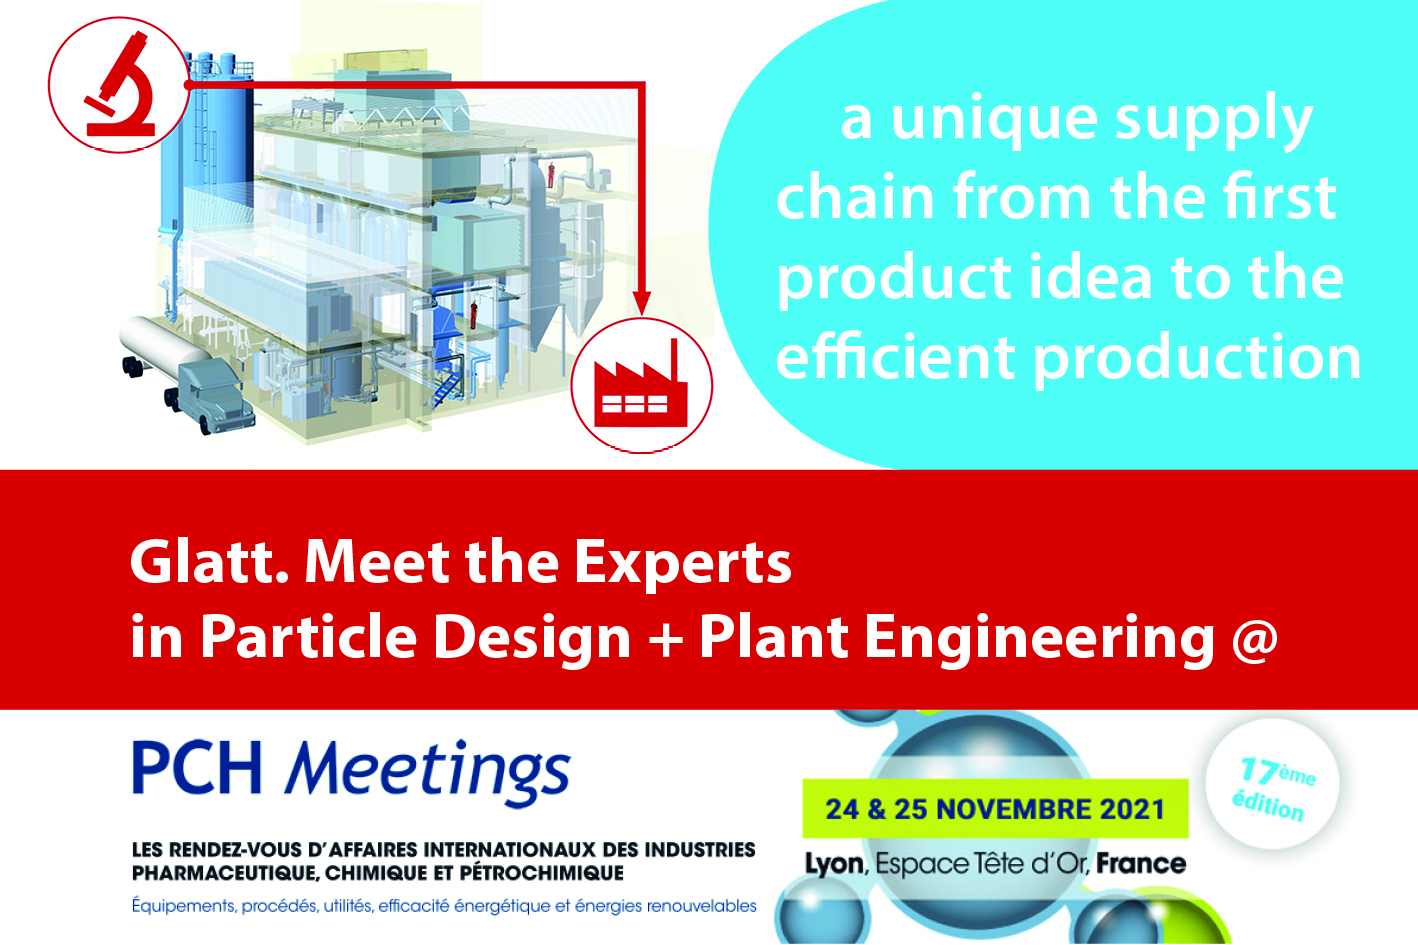 Meet the Glatt Experts for Particle Design and Plant Engineering at the PCH Meetings from 24-25 November in Lyon, France